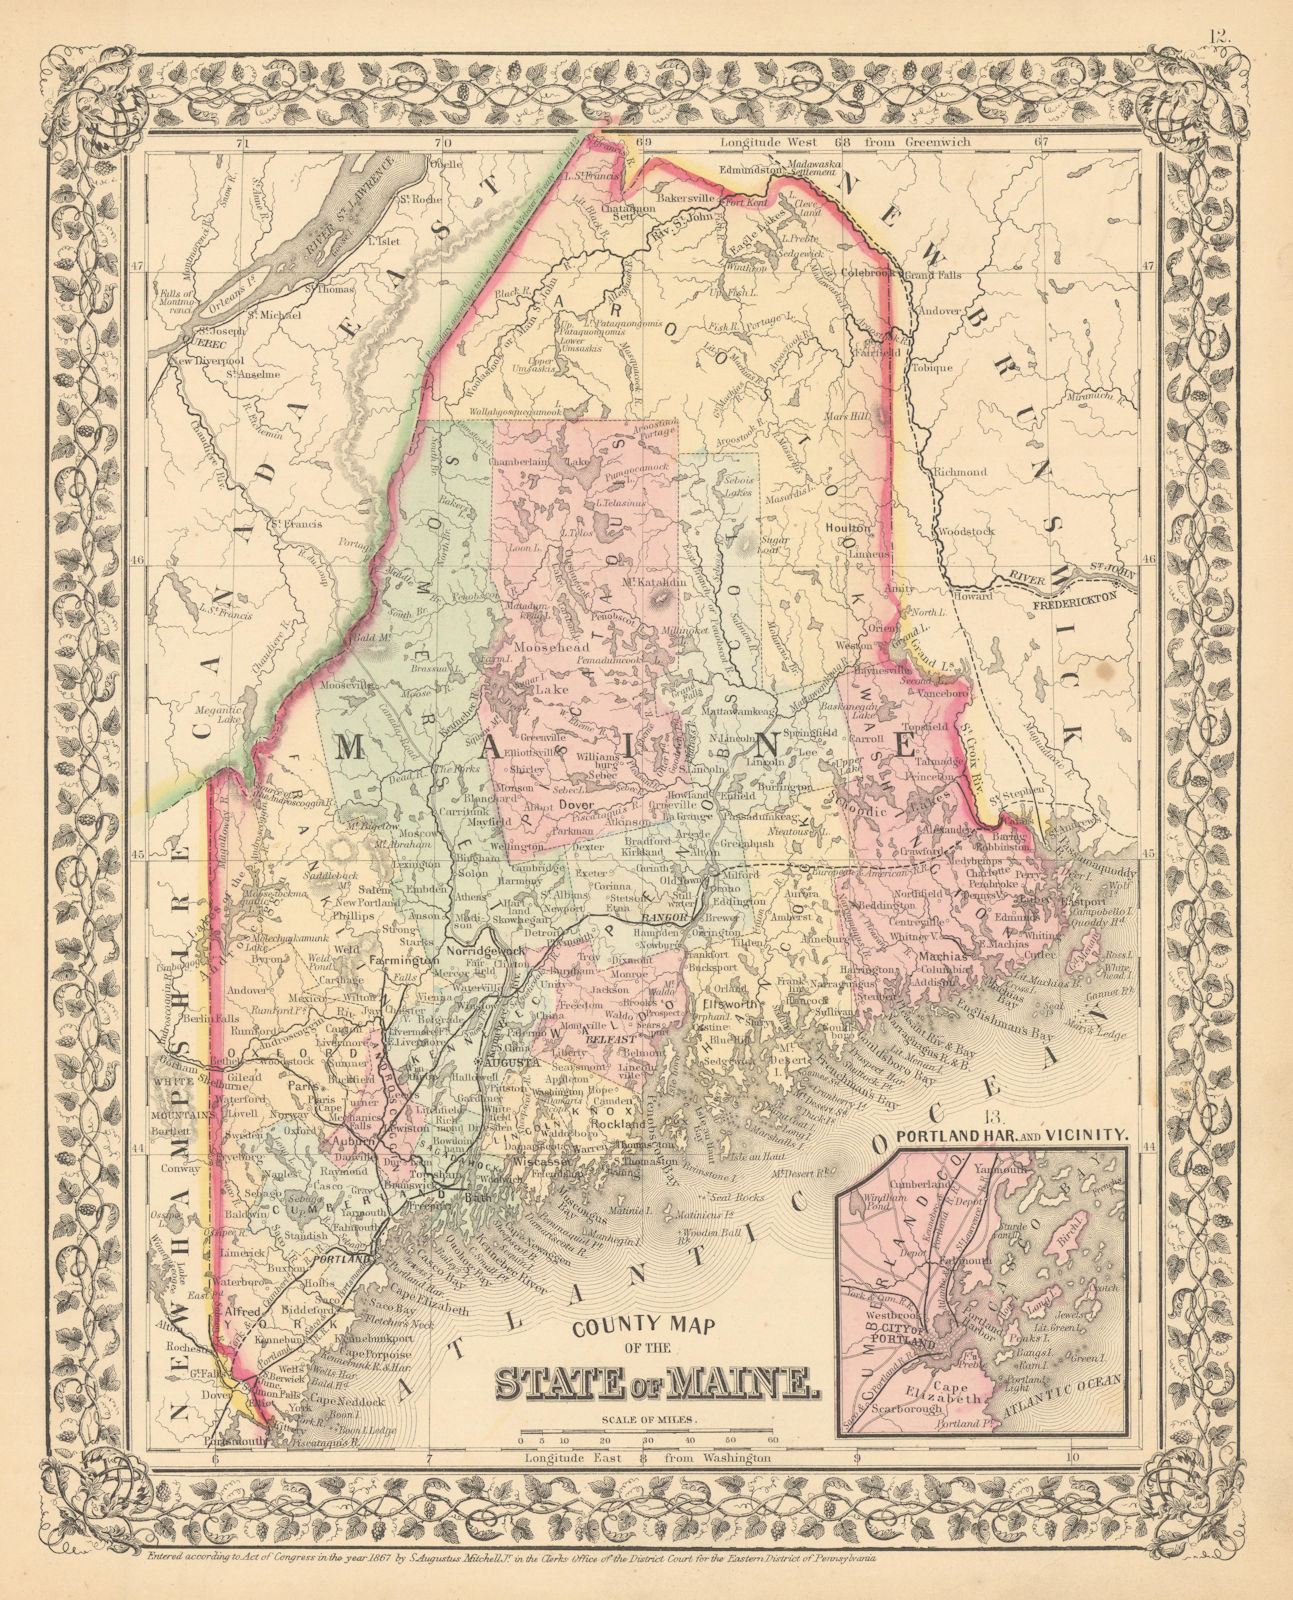 County map of the State of Maine. S. Augustus Mitchell. Portland Harbor 1869